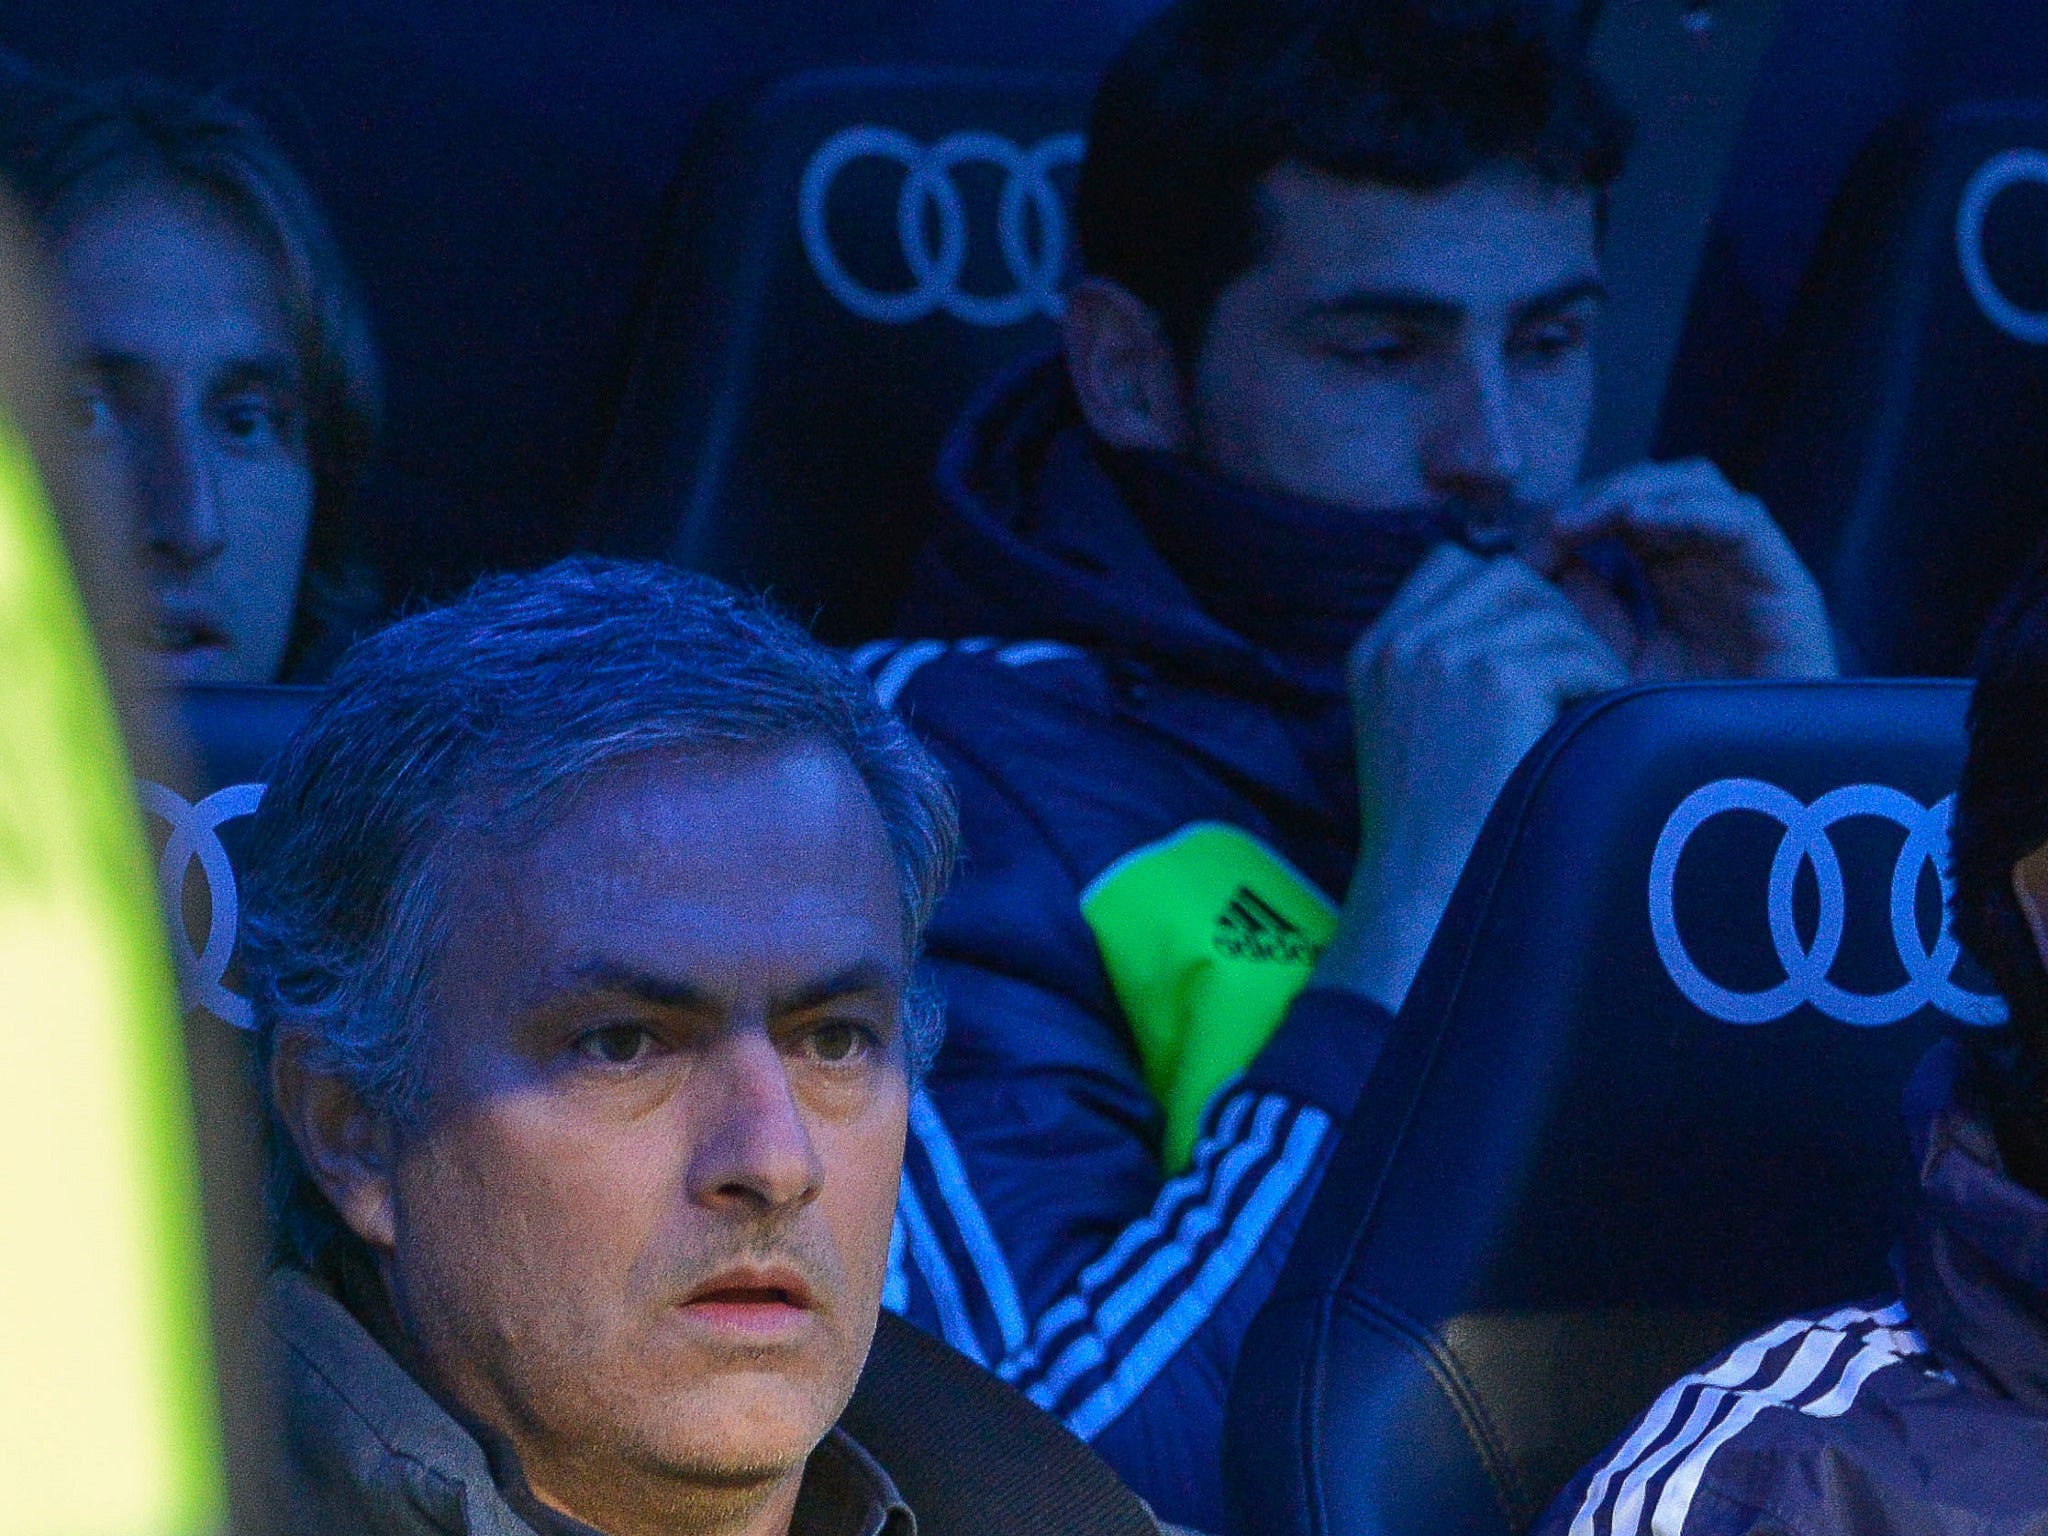 Jose Mourinho and Iker Casillas didn't enjoy the best of relationships in Madrid